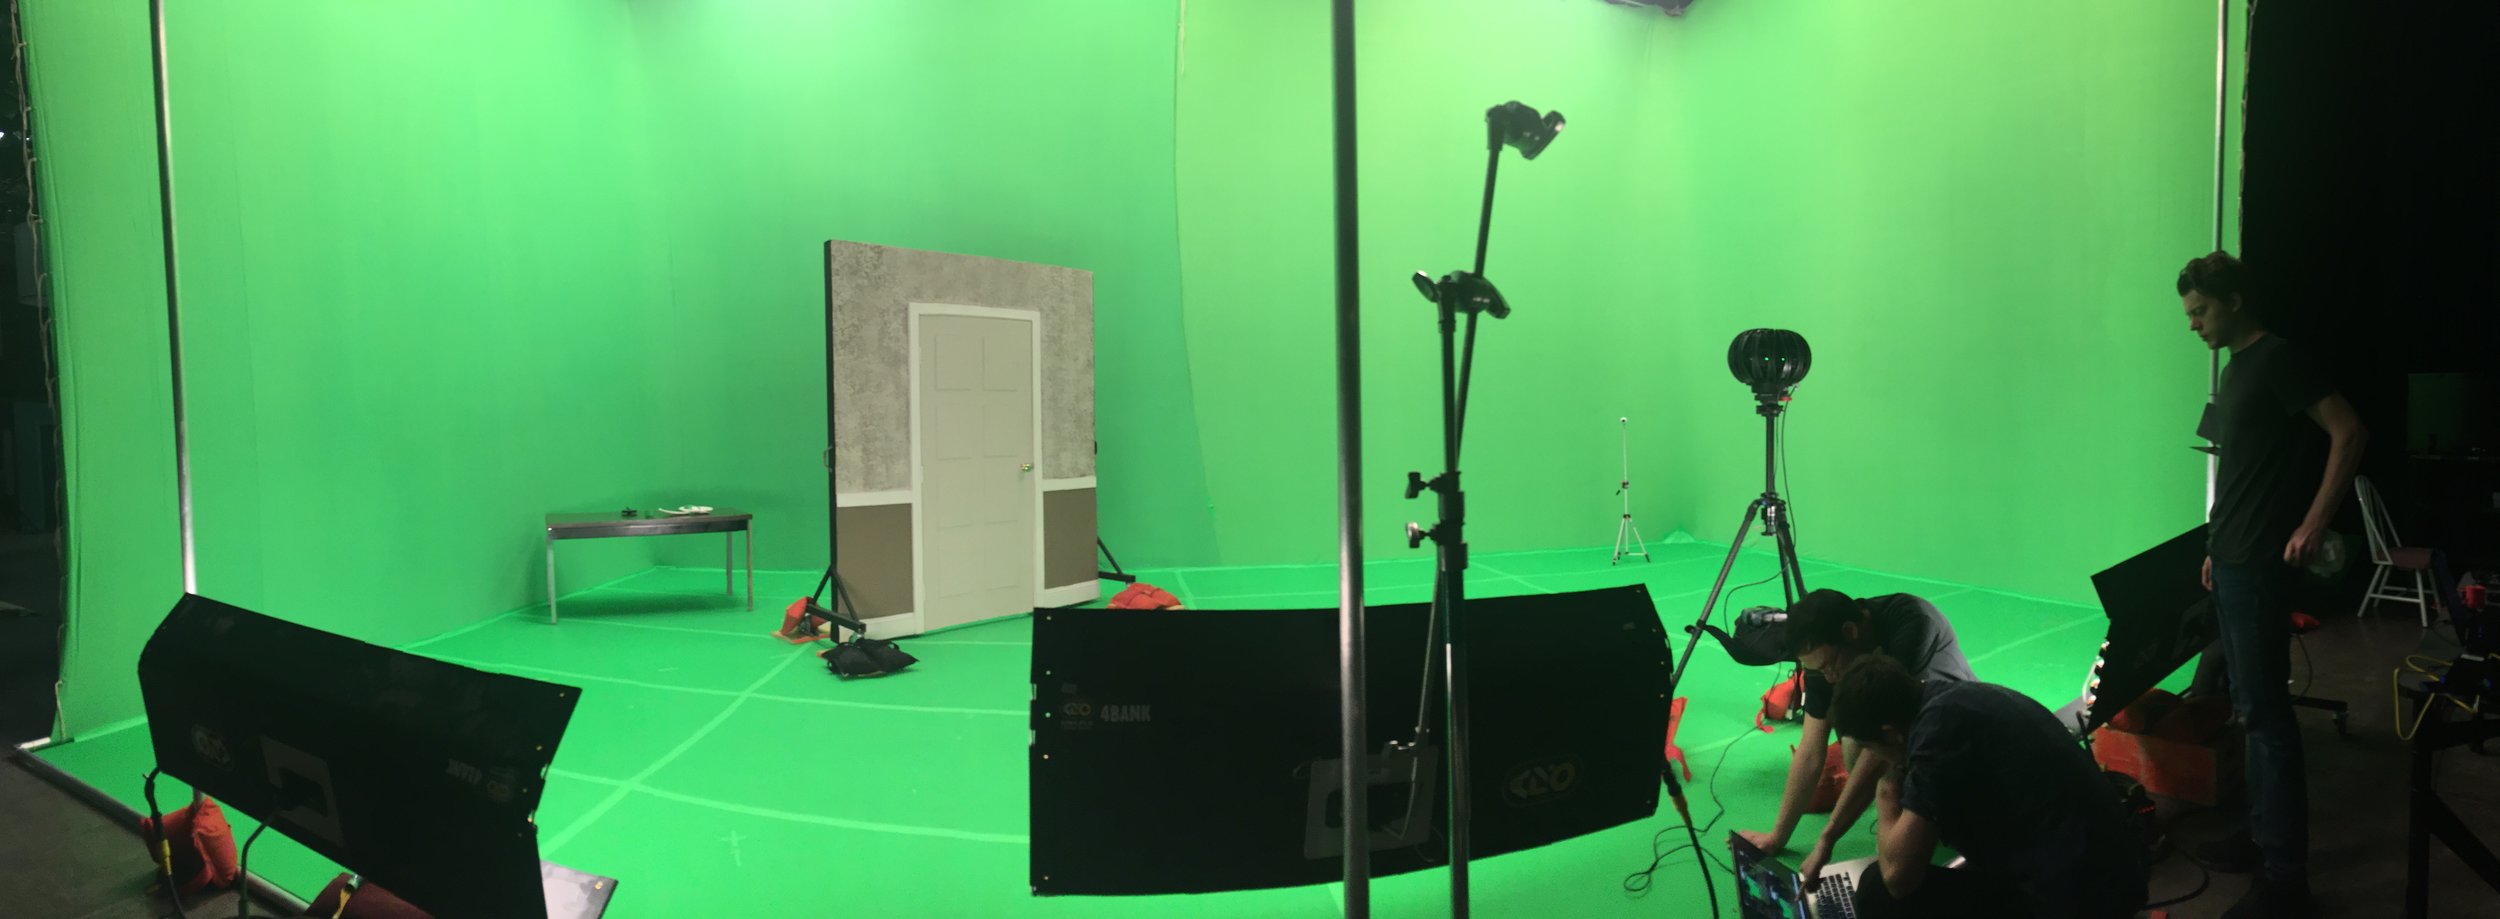  The finished panorama setup, with set pieces from Scene 1. 